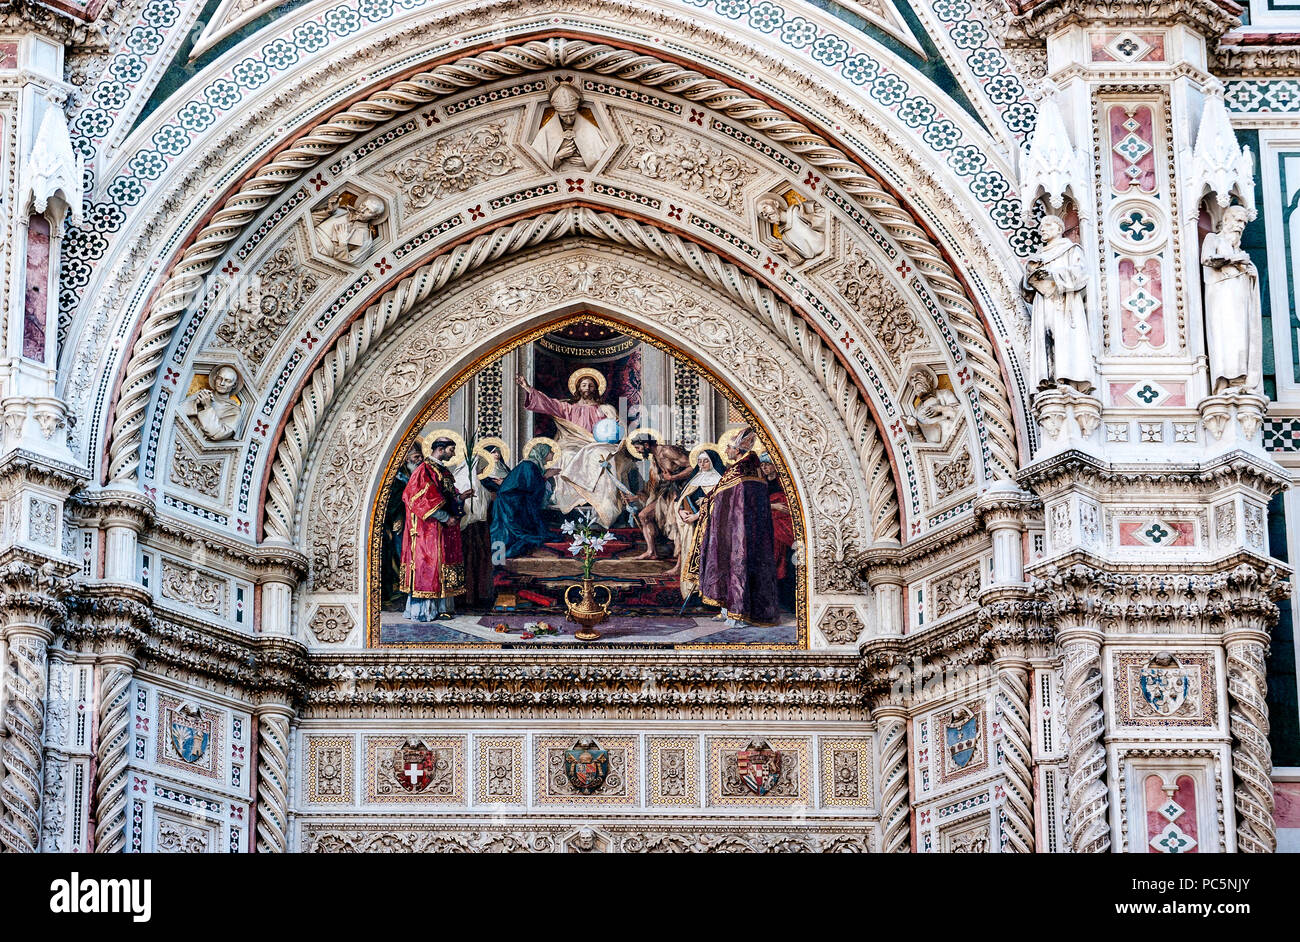 The arched Facade of the Cattedrale di Santa Maria del Fiore, Florence, Italy Stock Photo